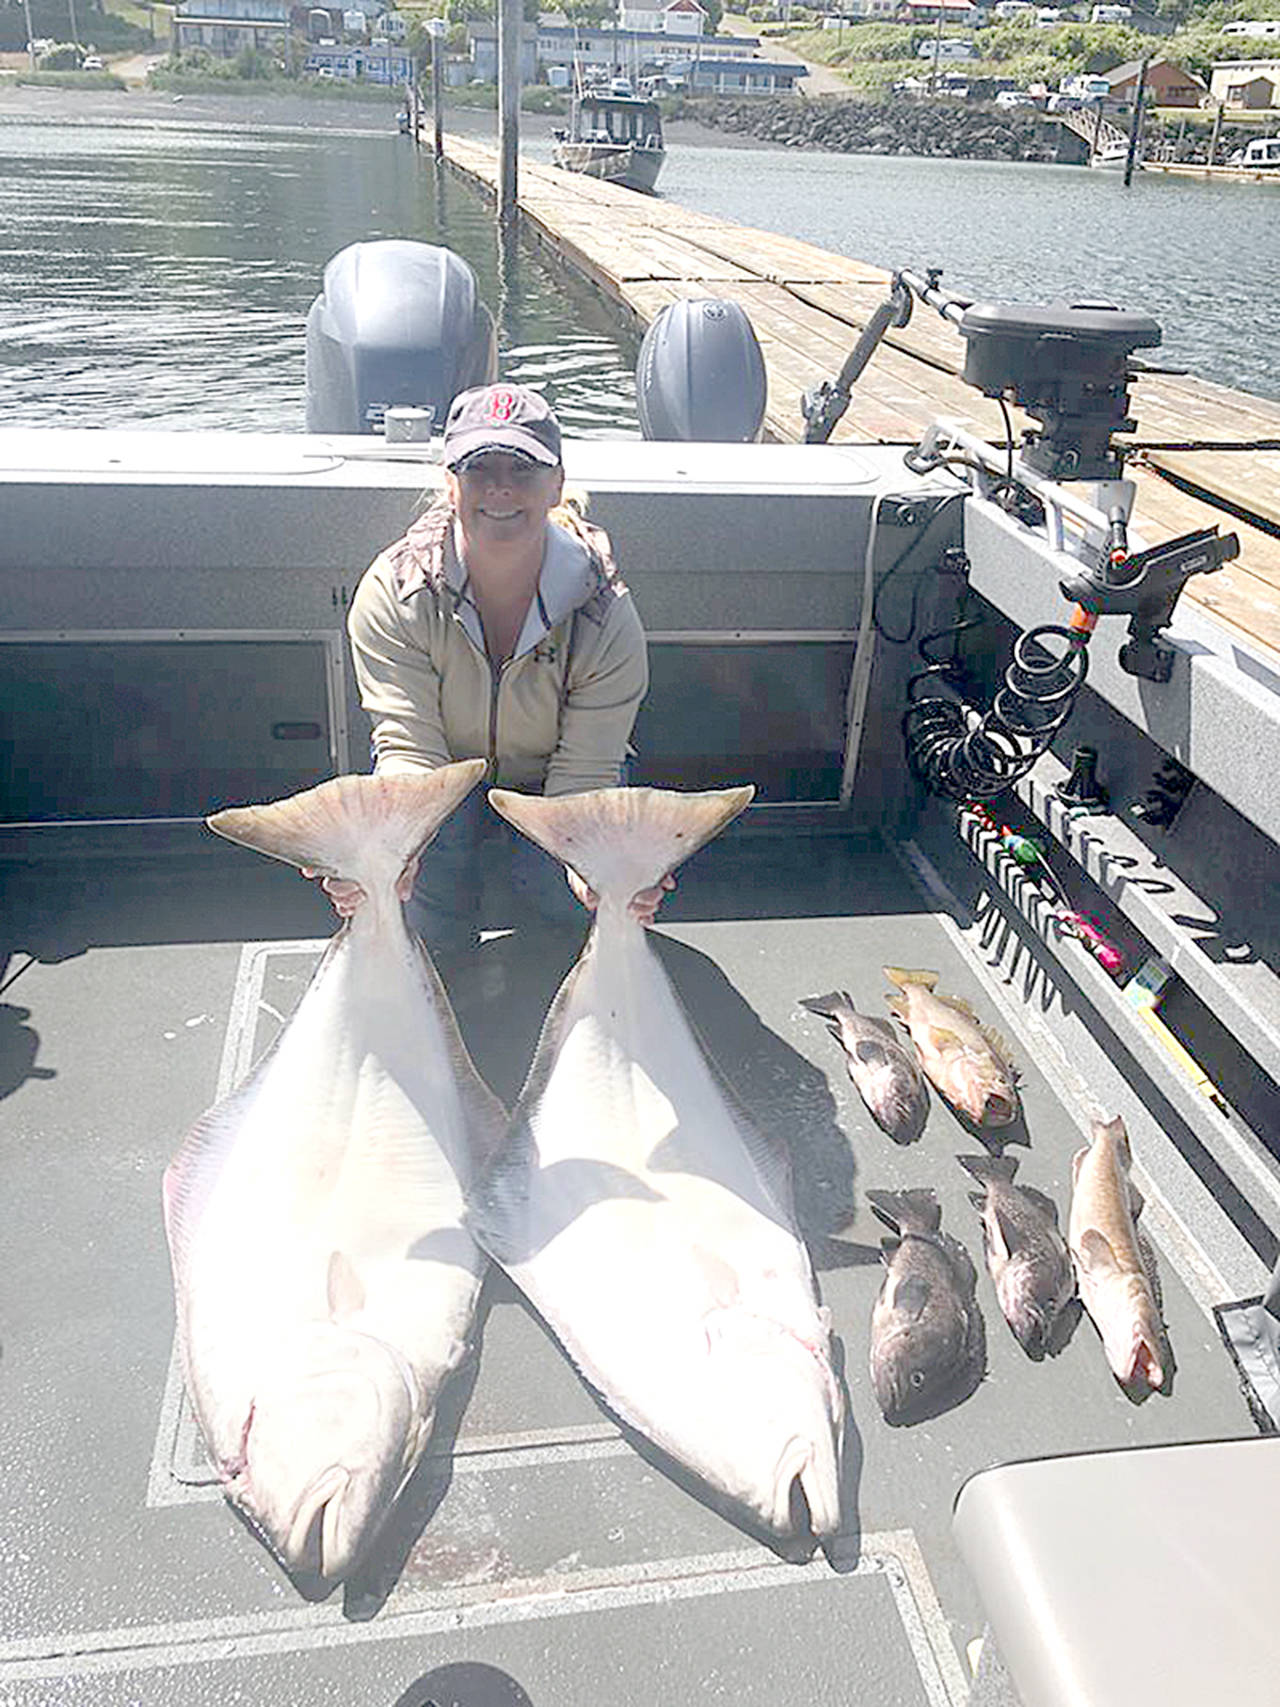 Anglers Koral Miller, pictured, and her husband Chris, brought these good-sized halibut back to the docks at Mason’s Olson Resort in Sekiu last Saturday.